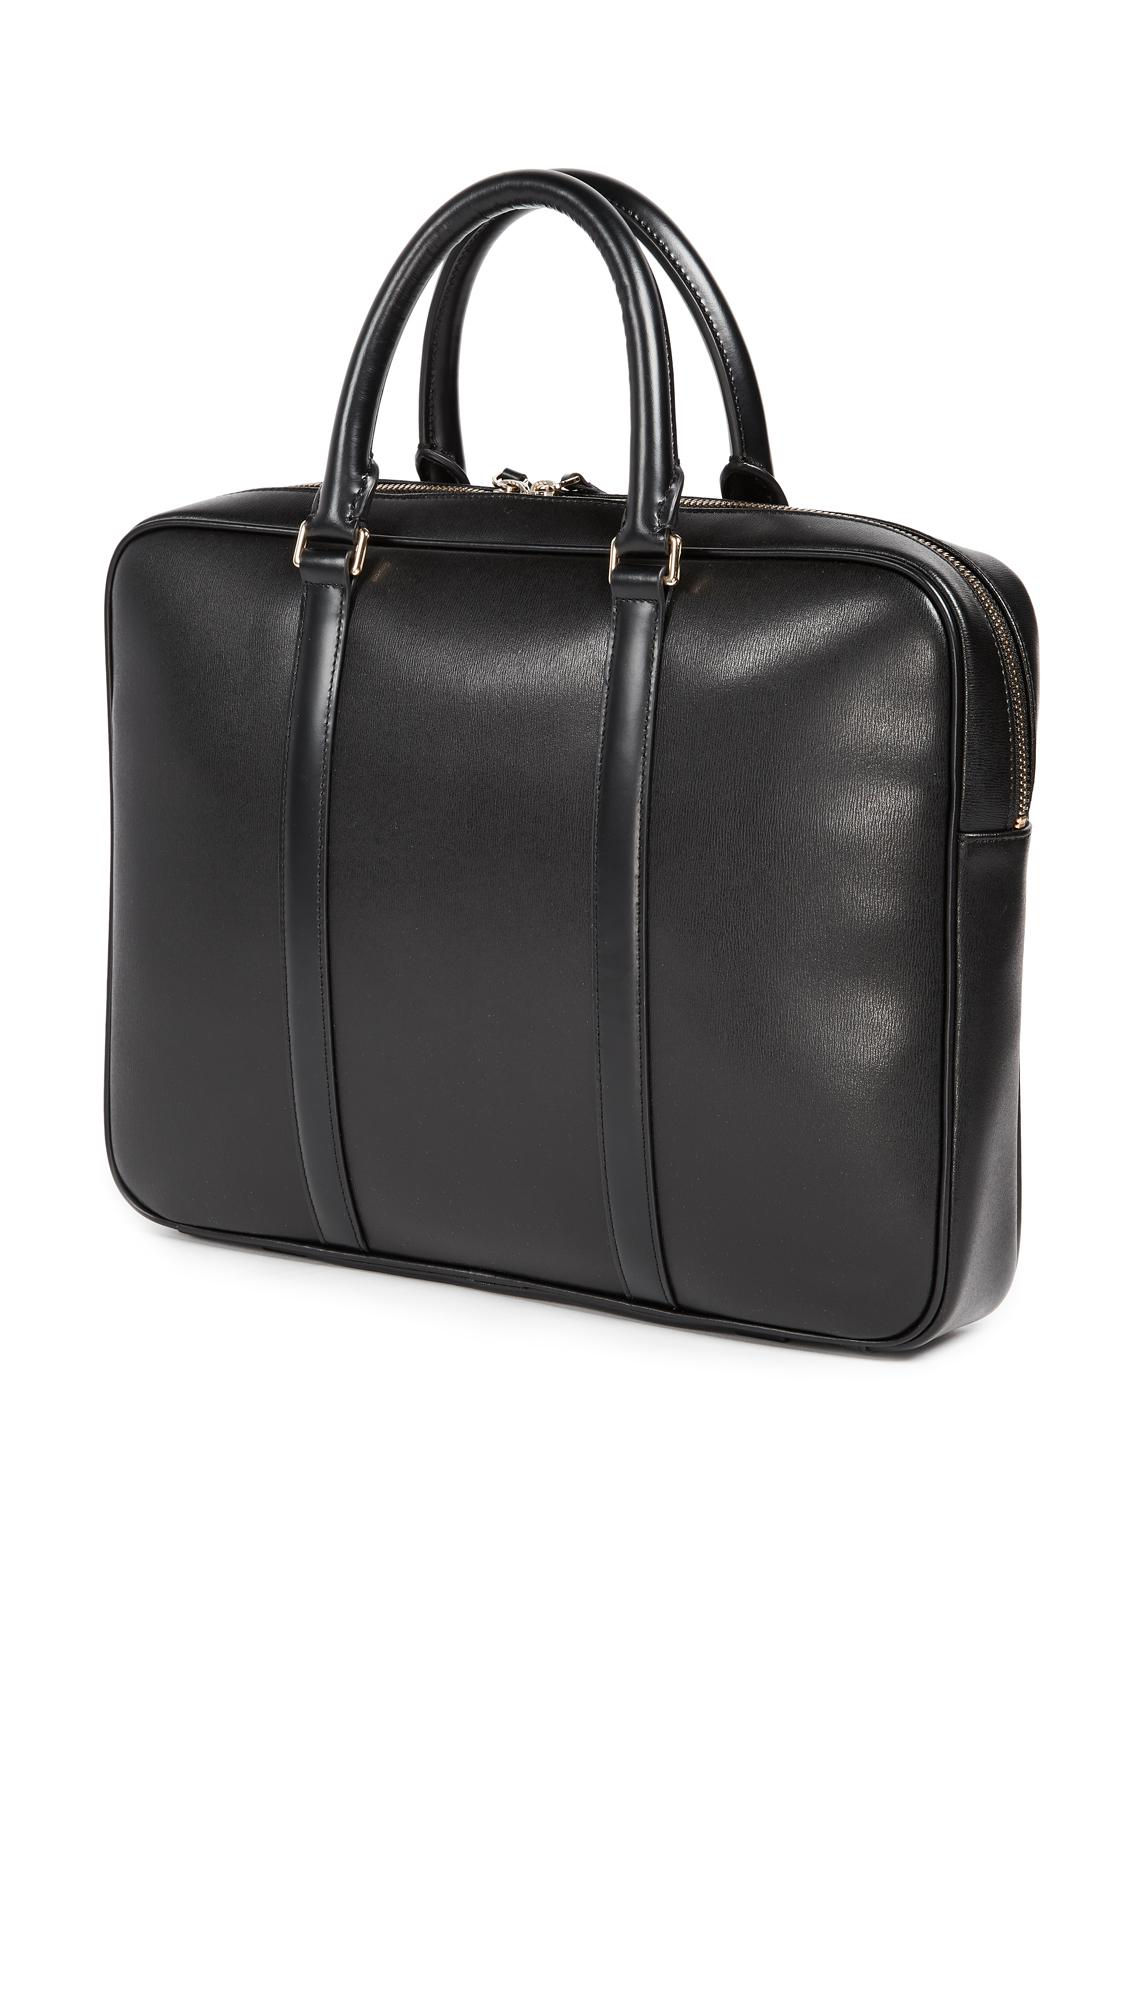 Lyst - Paul Smith Leather Briefcase in Black for Men